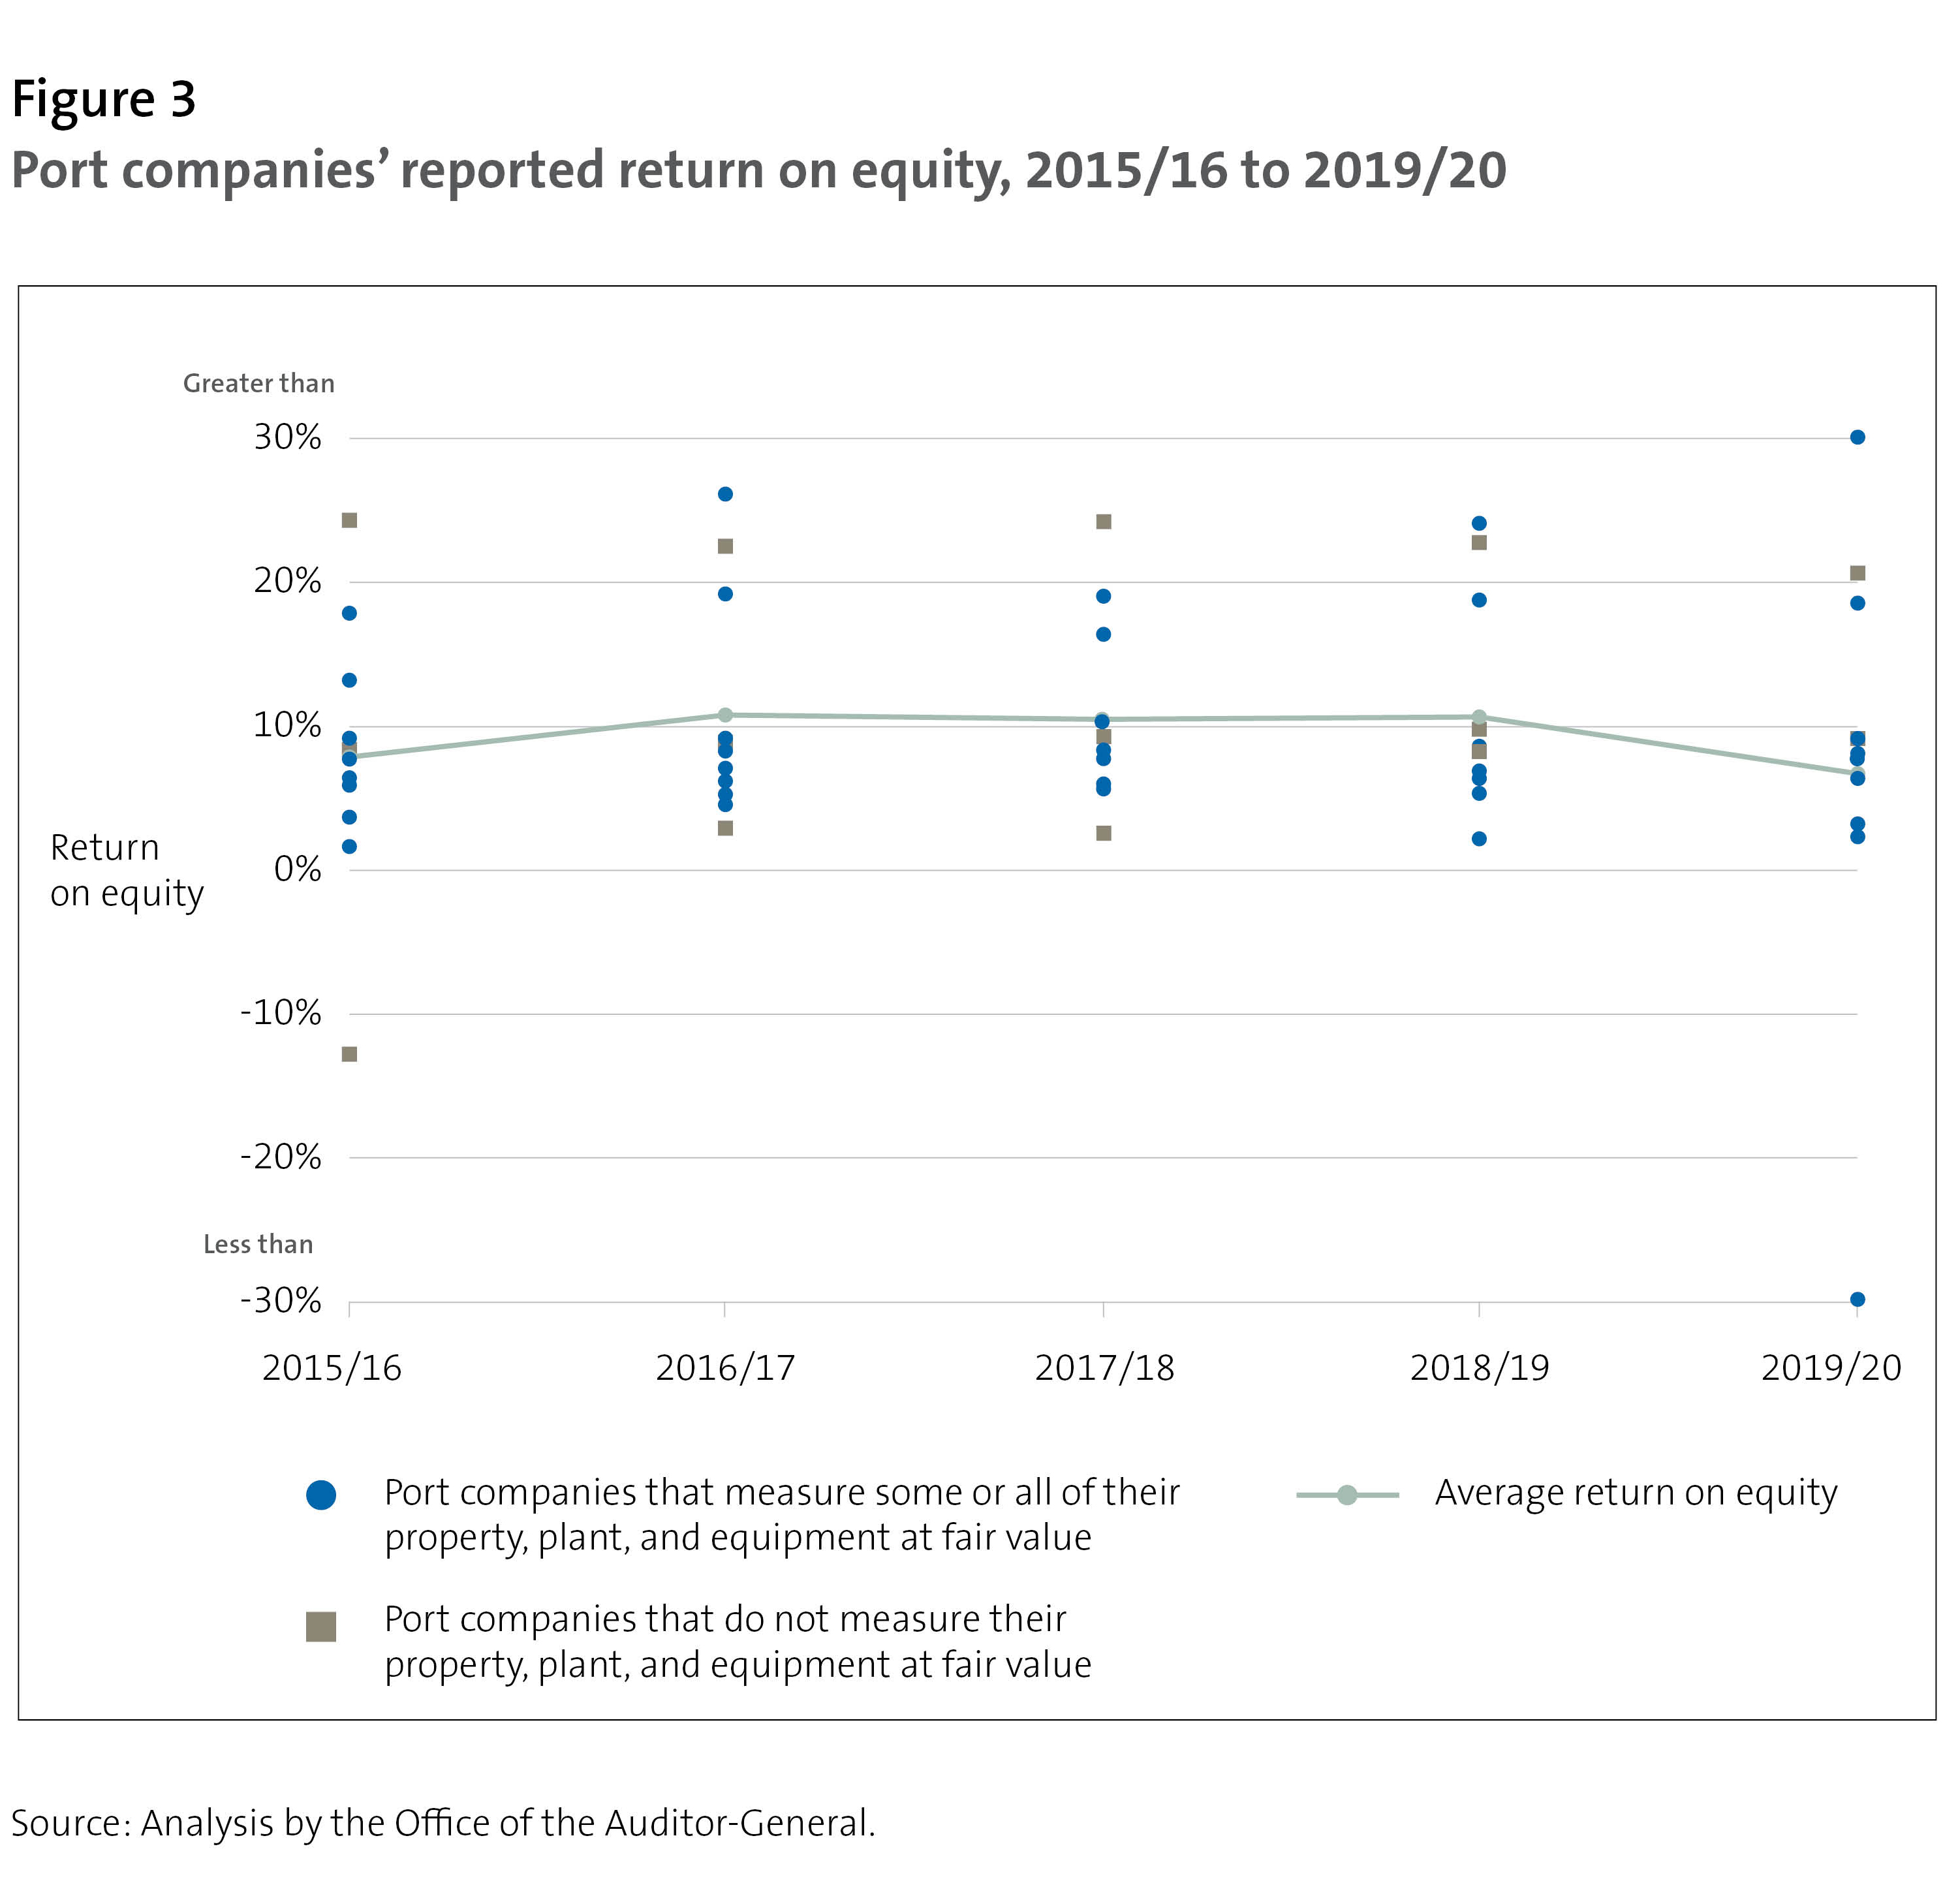 Figure 3 - Port companies' reported return on equity, 2015/16 to 2019/20